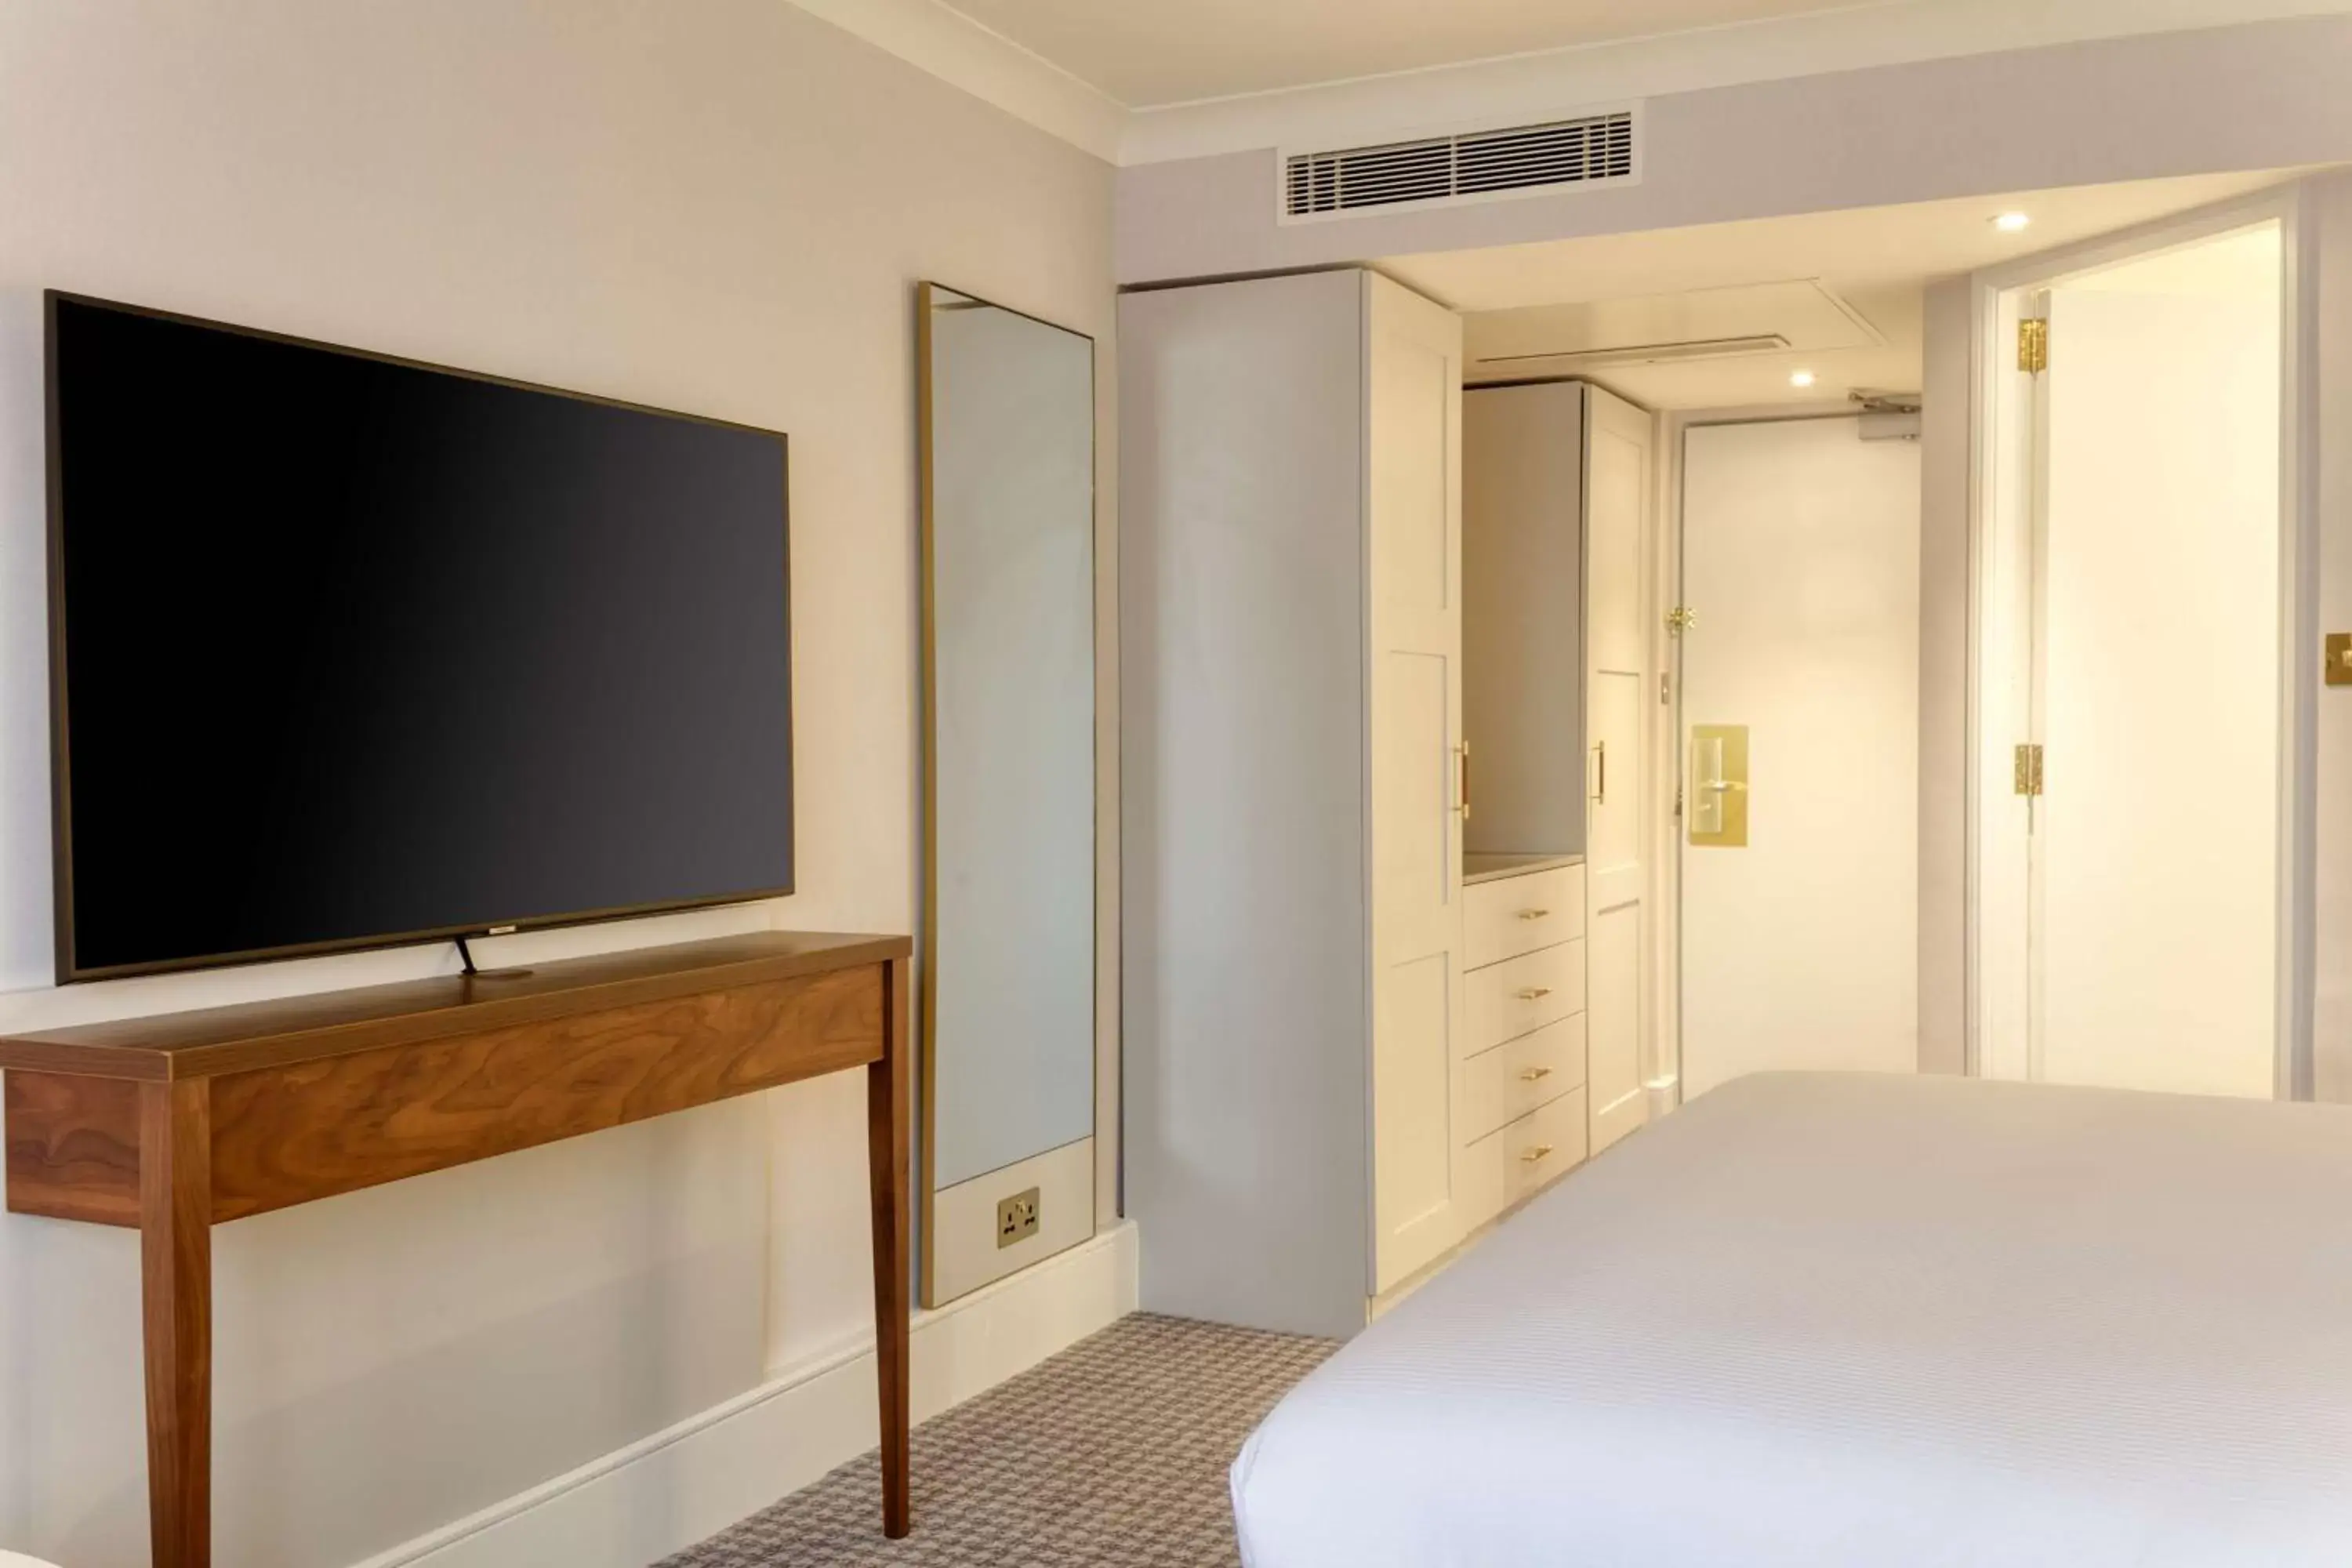 Bedroom, TV/Entertainment Center in DoubleTree by Hilton Stoke-on-Trent, United Kingdom